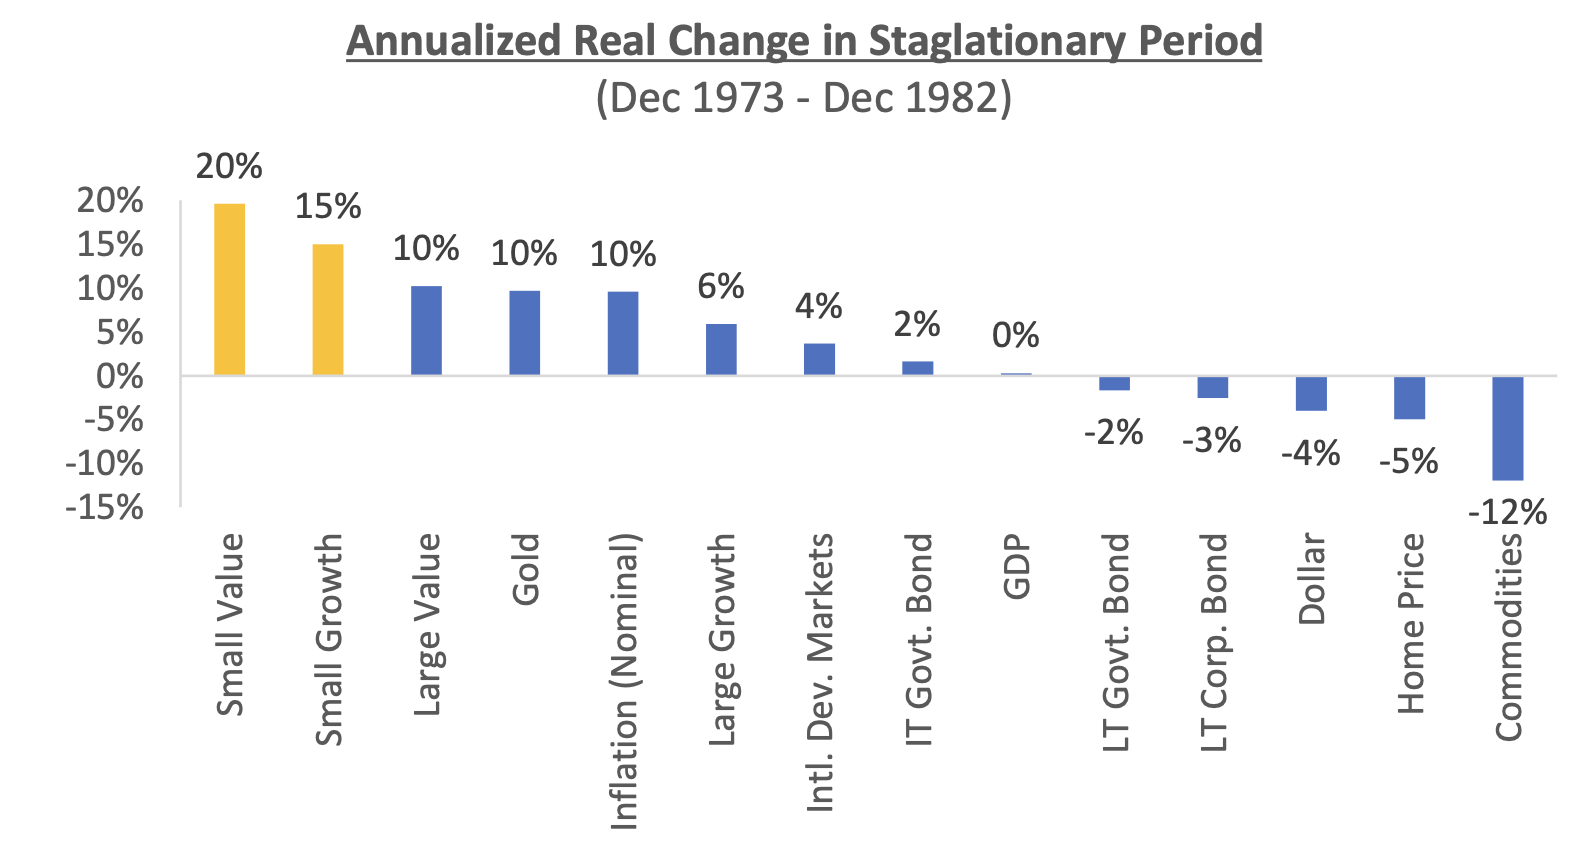 Annualized Real Change By Asset Class During 1973-1982 Stagflation 